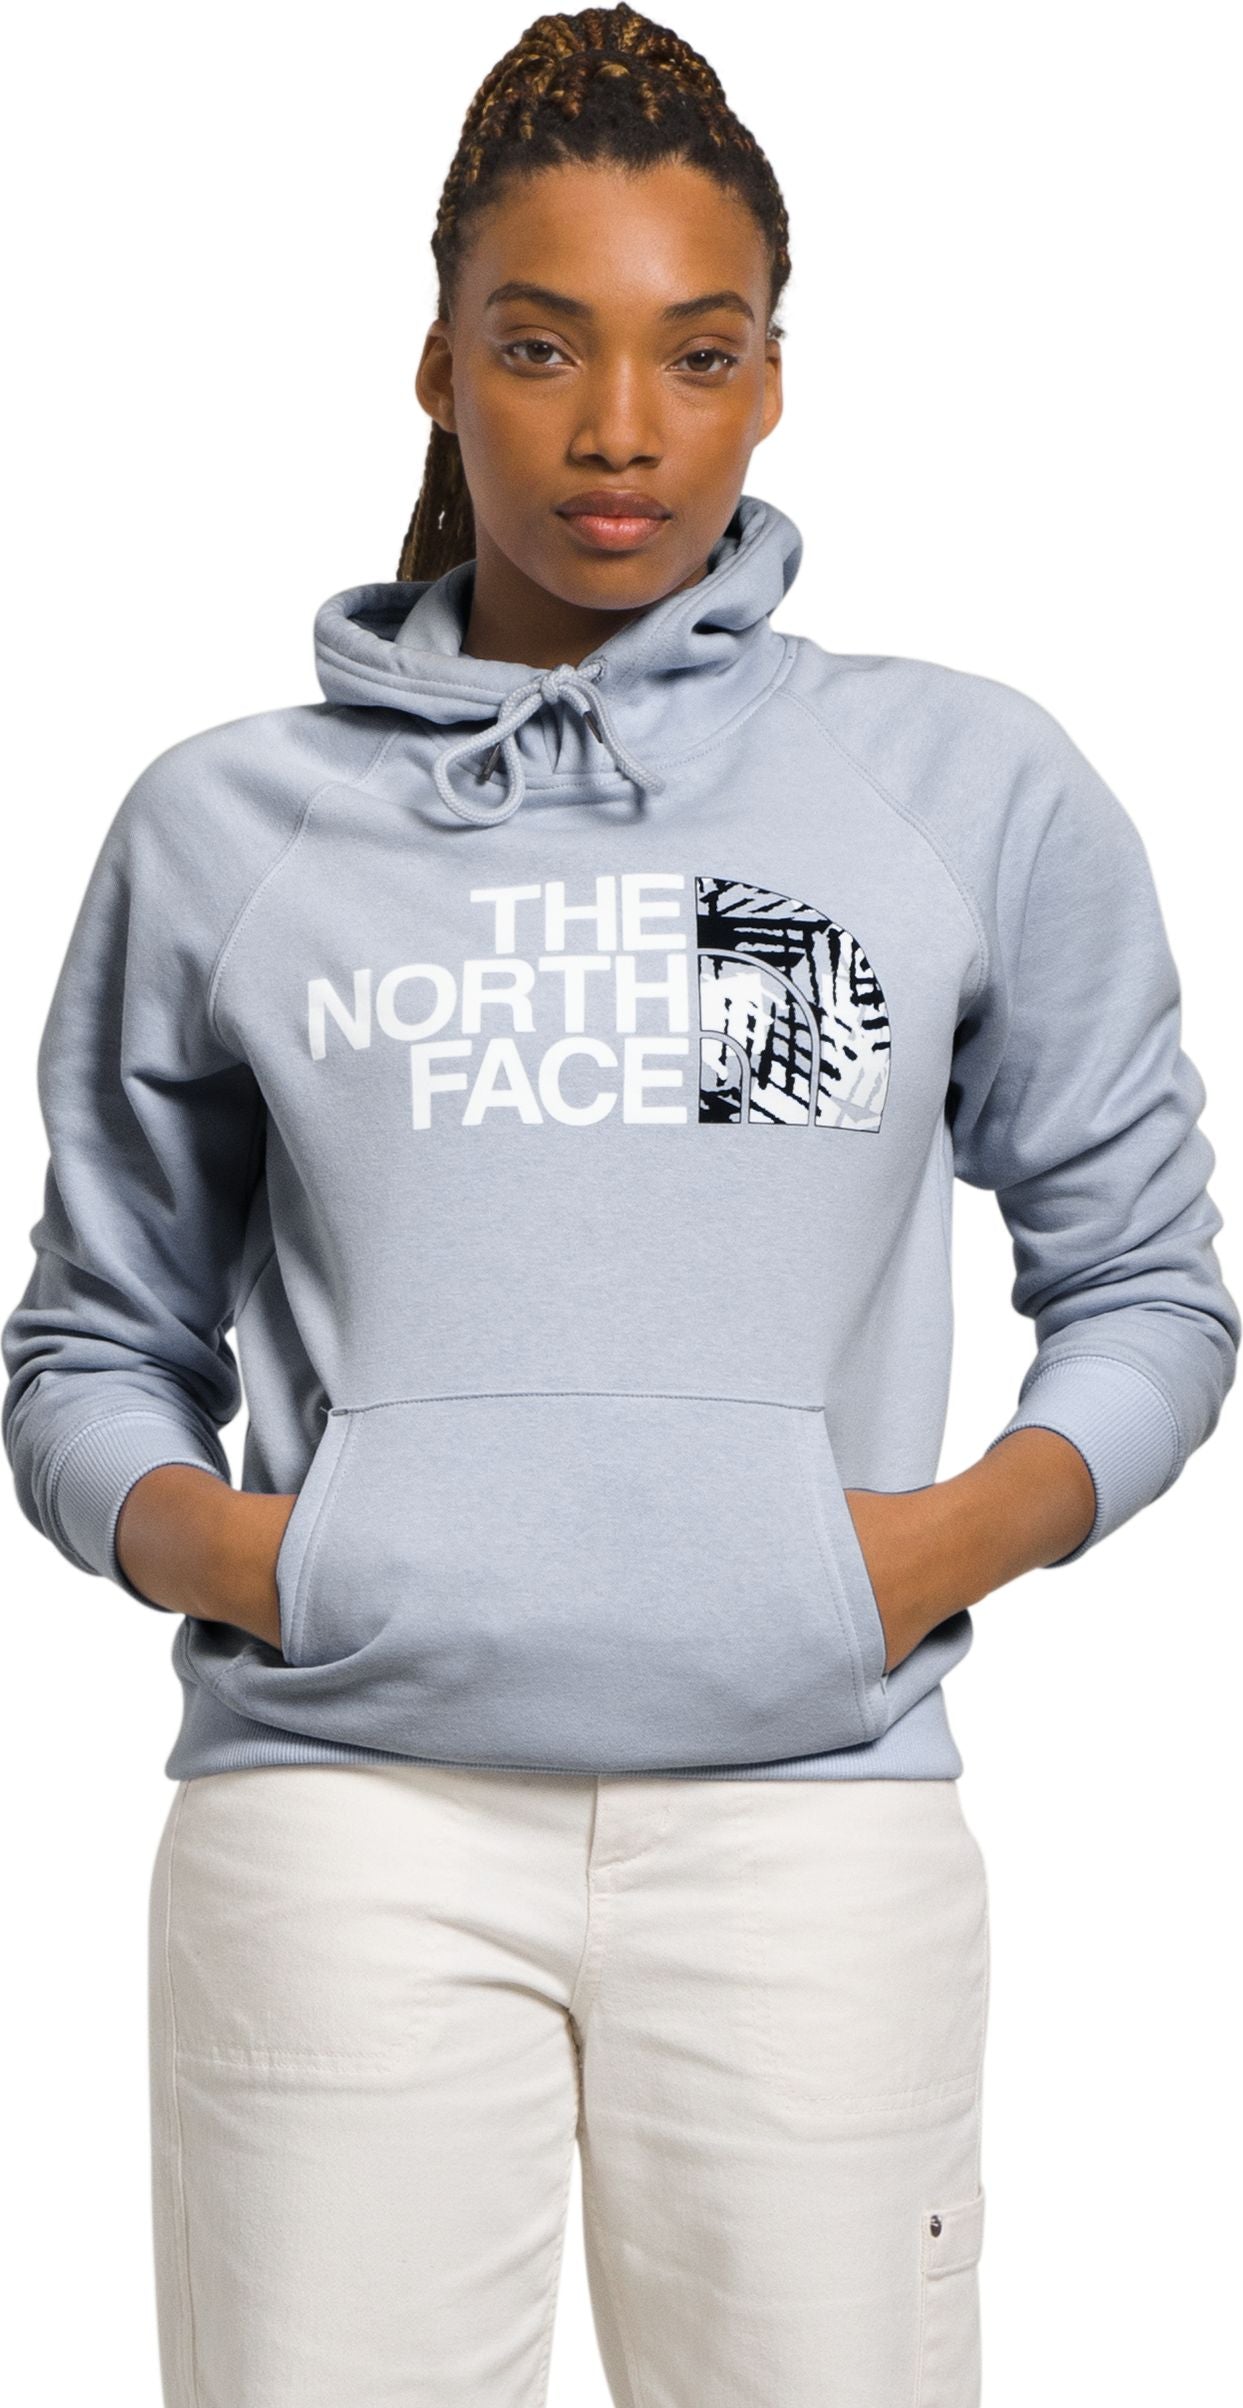 http://www.quarkshoes.com/cdn/shop/products/The_20North_20Face-Apparel-W-Half-Dome-Hoodie-Cosmic-Dusty-Periwinkle-Crosshatch-Camo-Print-108244.jpg?v=1697147219